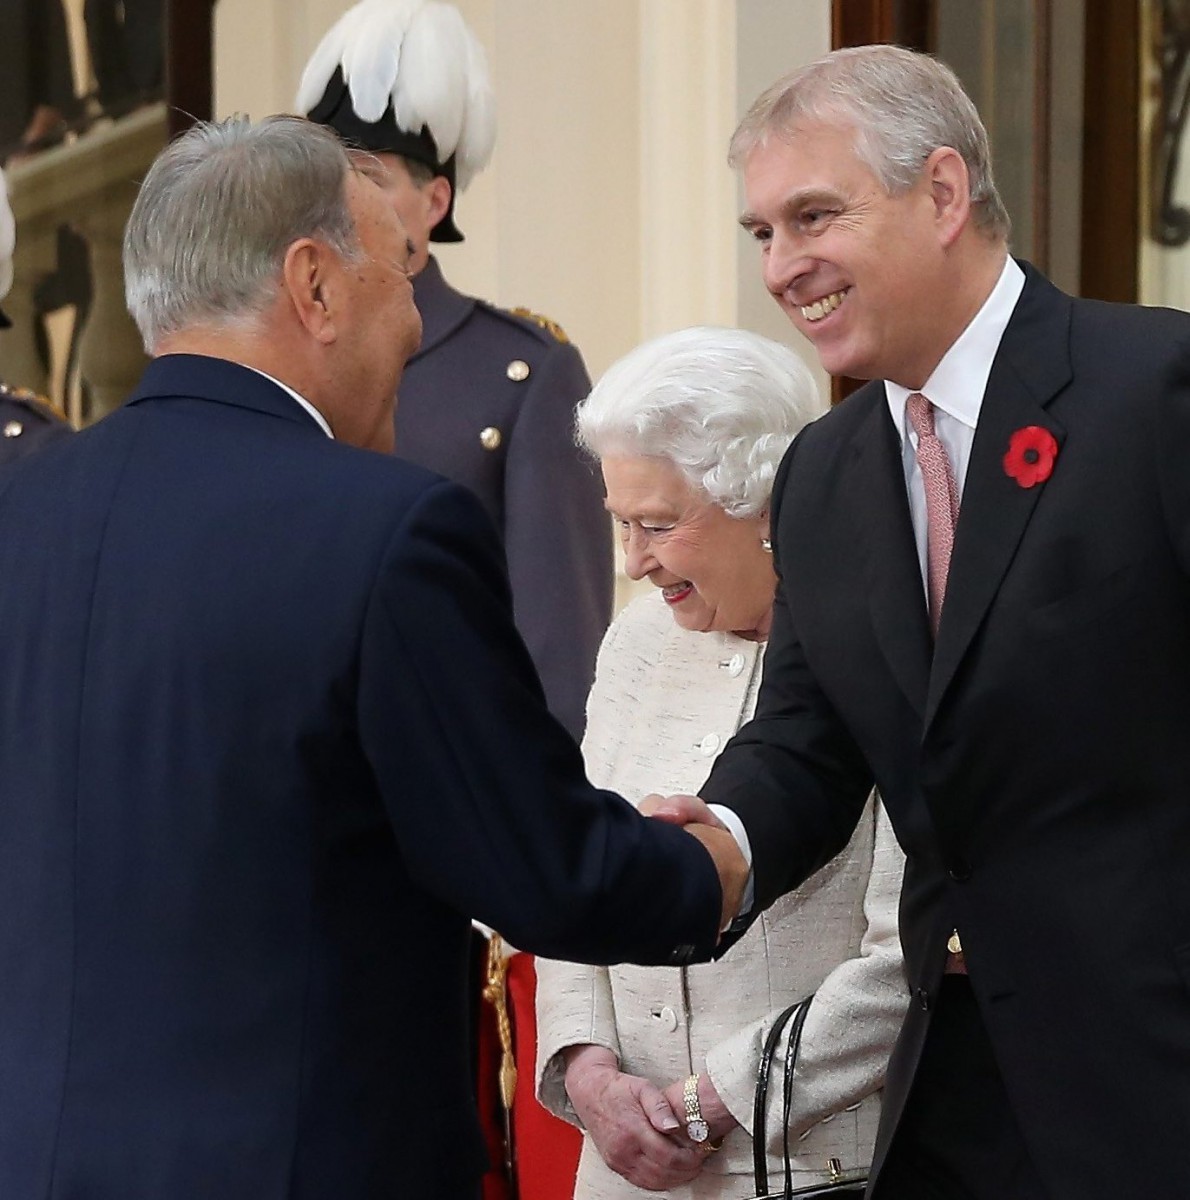 The Queen and Prince Andrew welcomed President Nazarbayev to Buckingham Palace in 2015